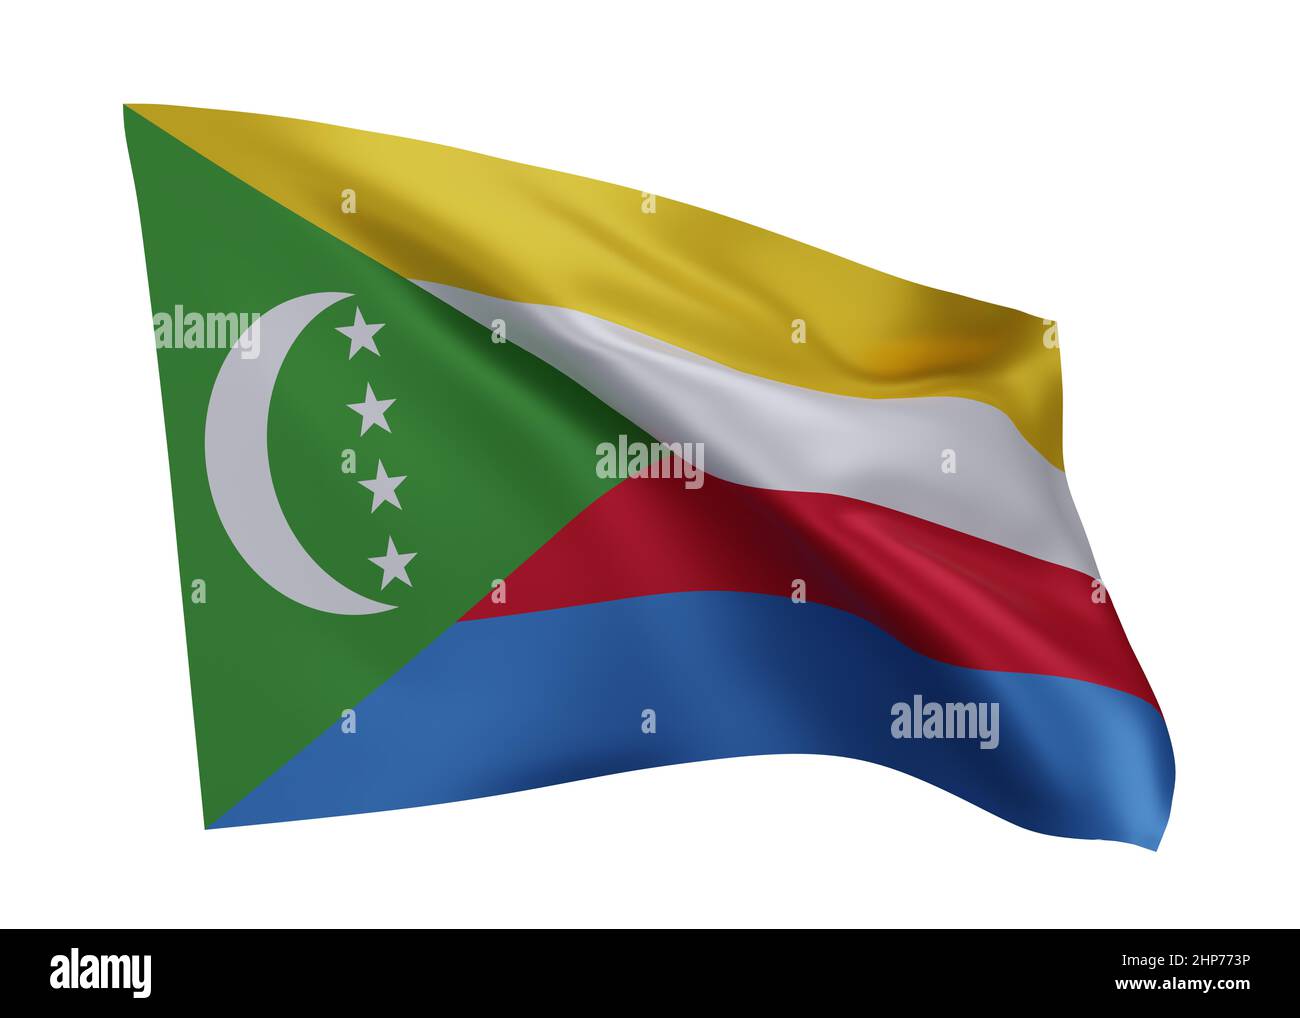 3d illustration flag of Comoros. Comoran high resolution flag isolated against white background. 3d rendering Stock Photo